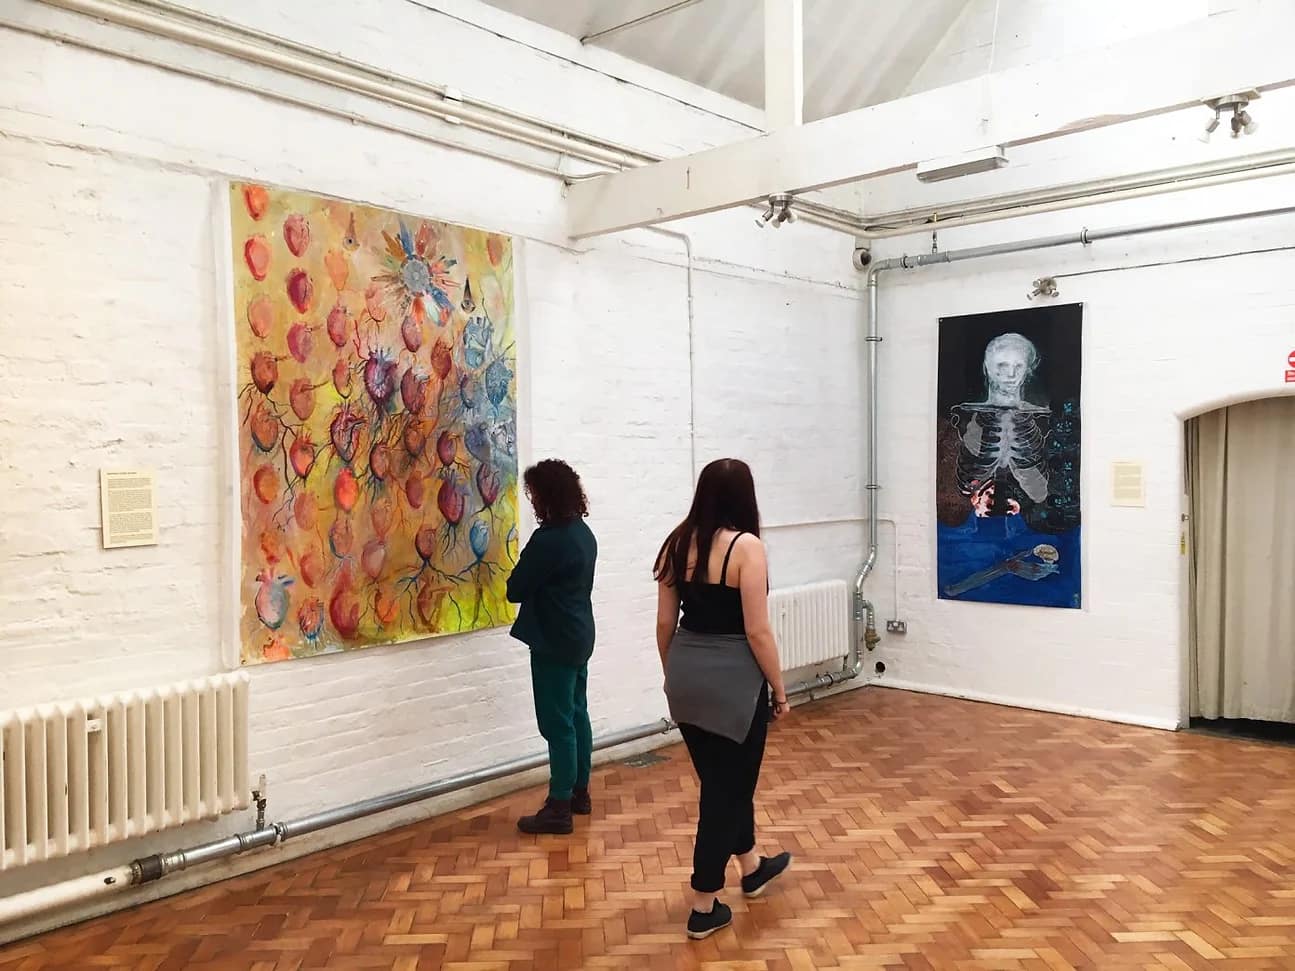 Two people in an exhibition room looking at art on the walls.